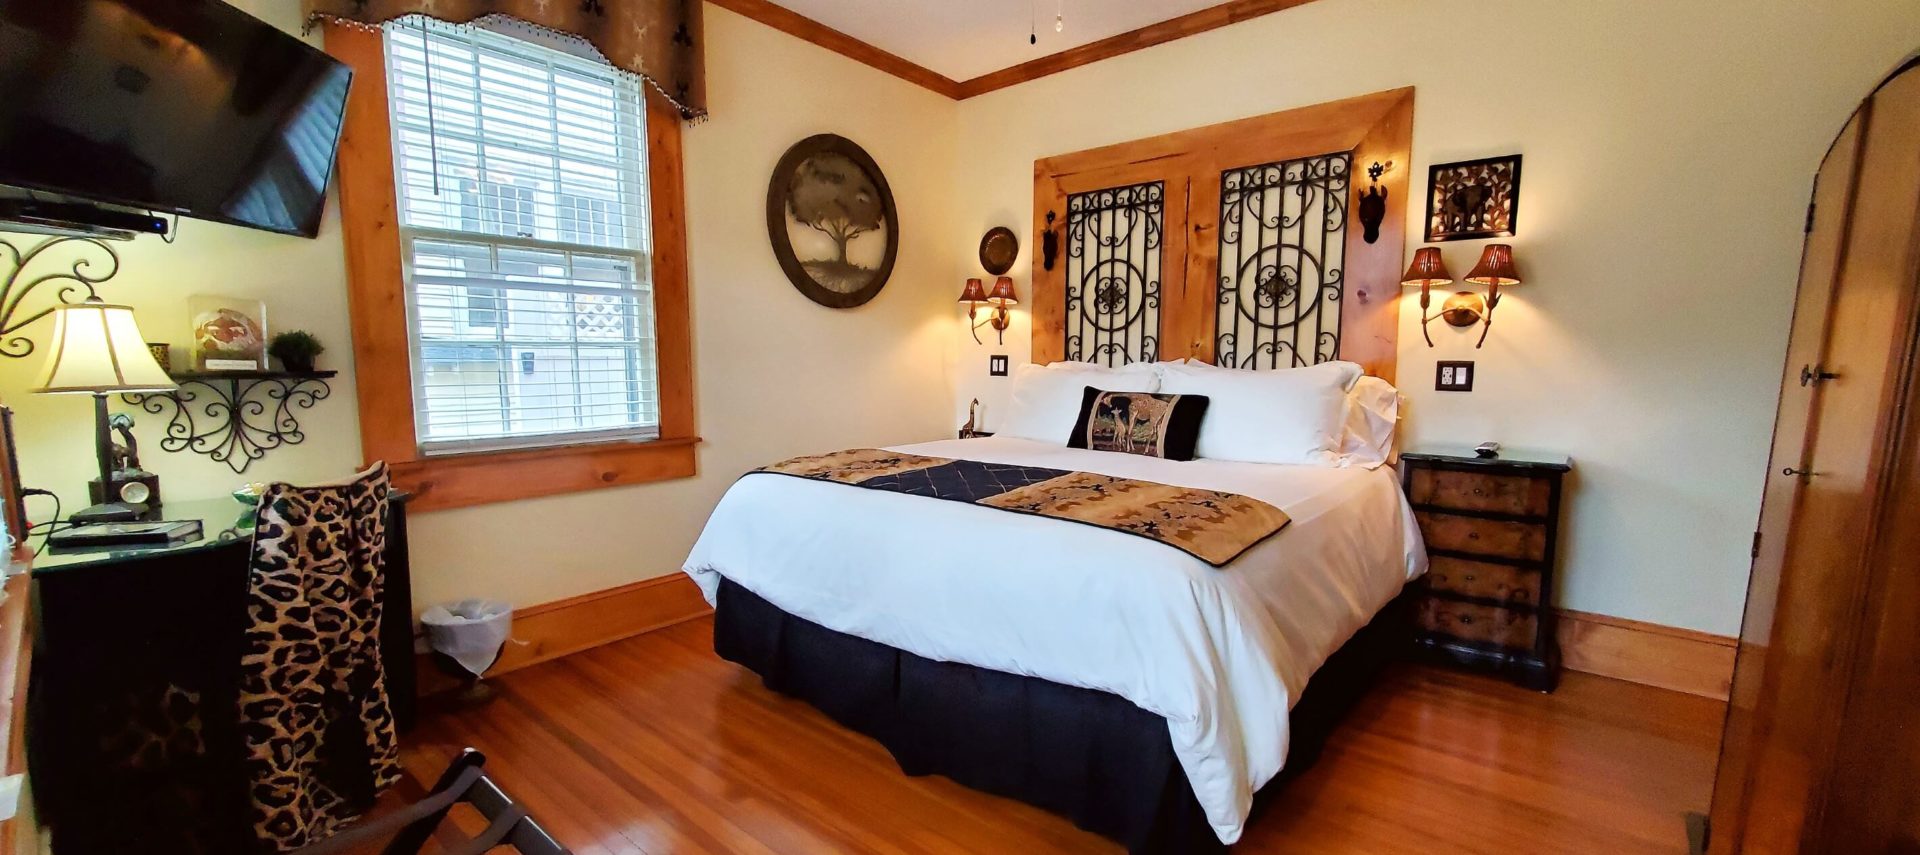 California King bed with wood and iron headboard in cream room with television and desk